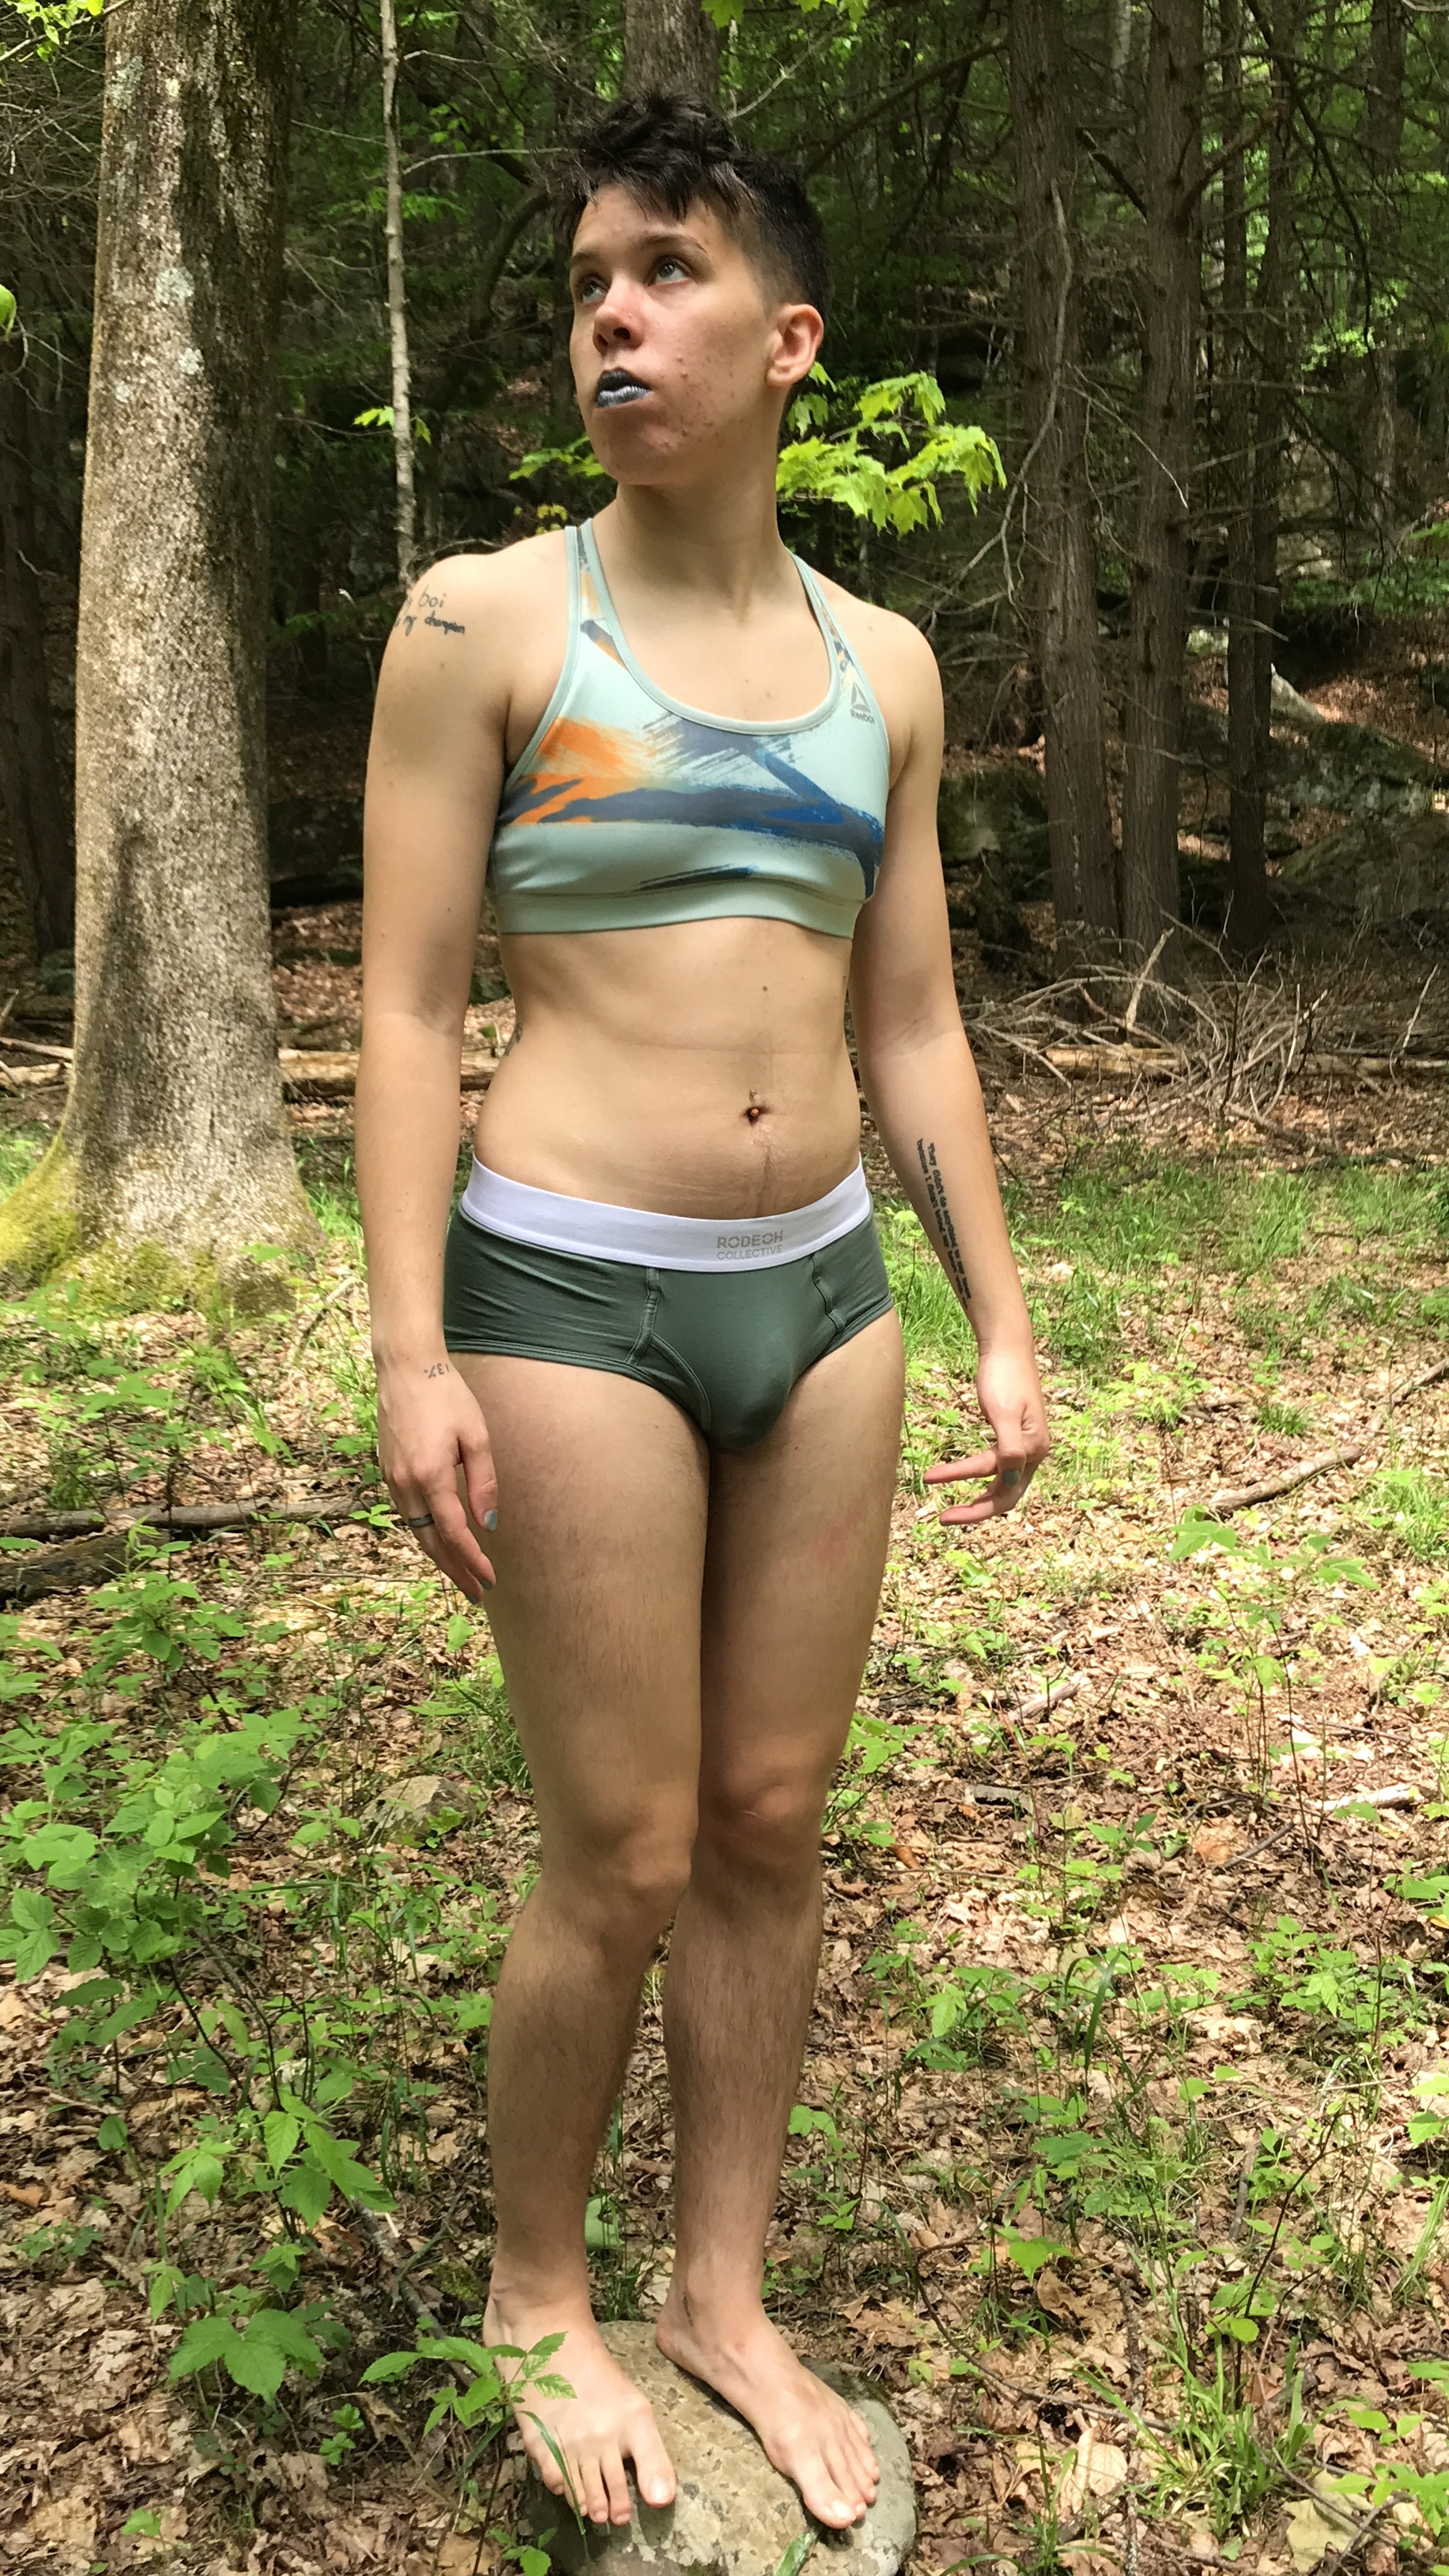 A trans person in the forest